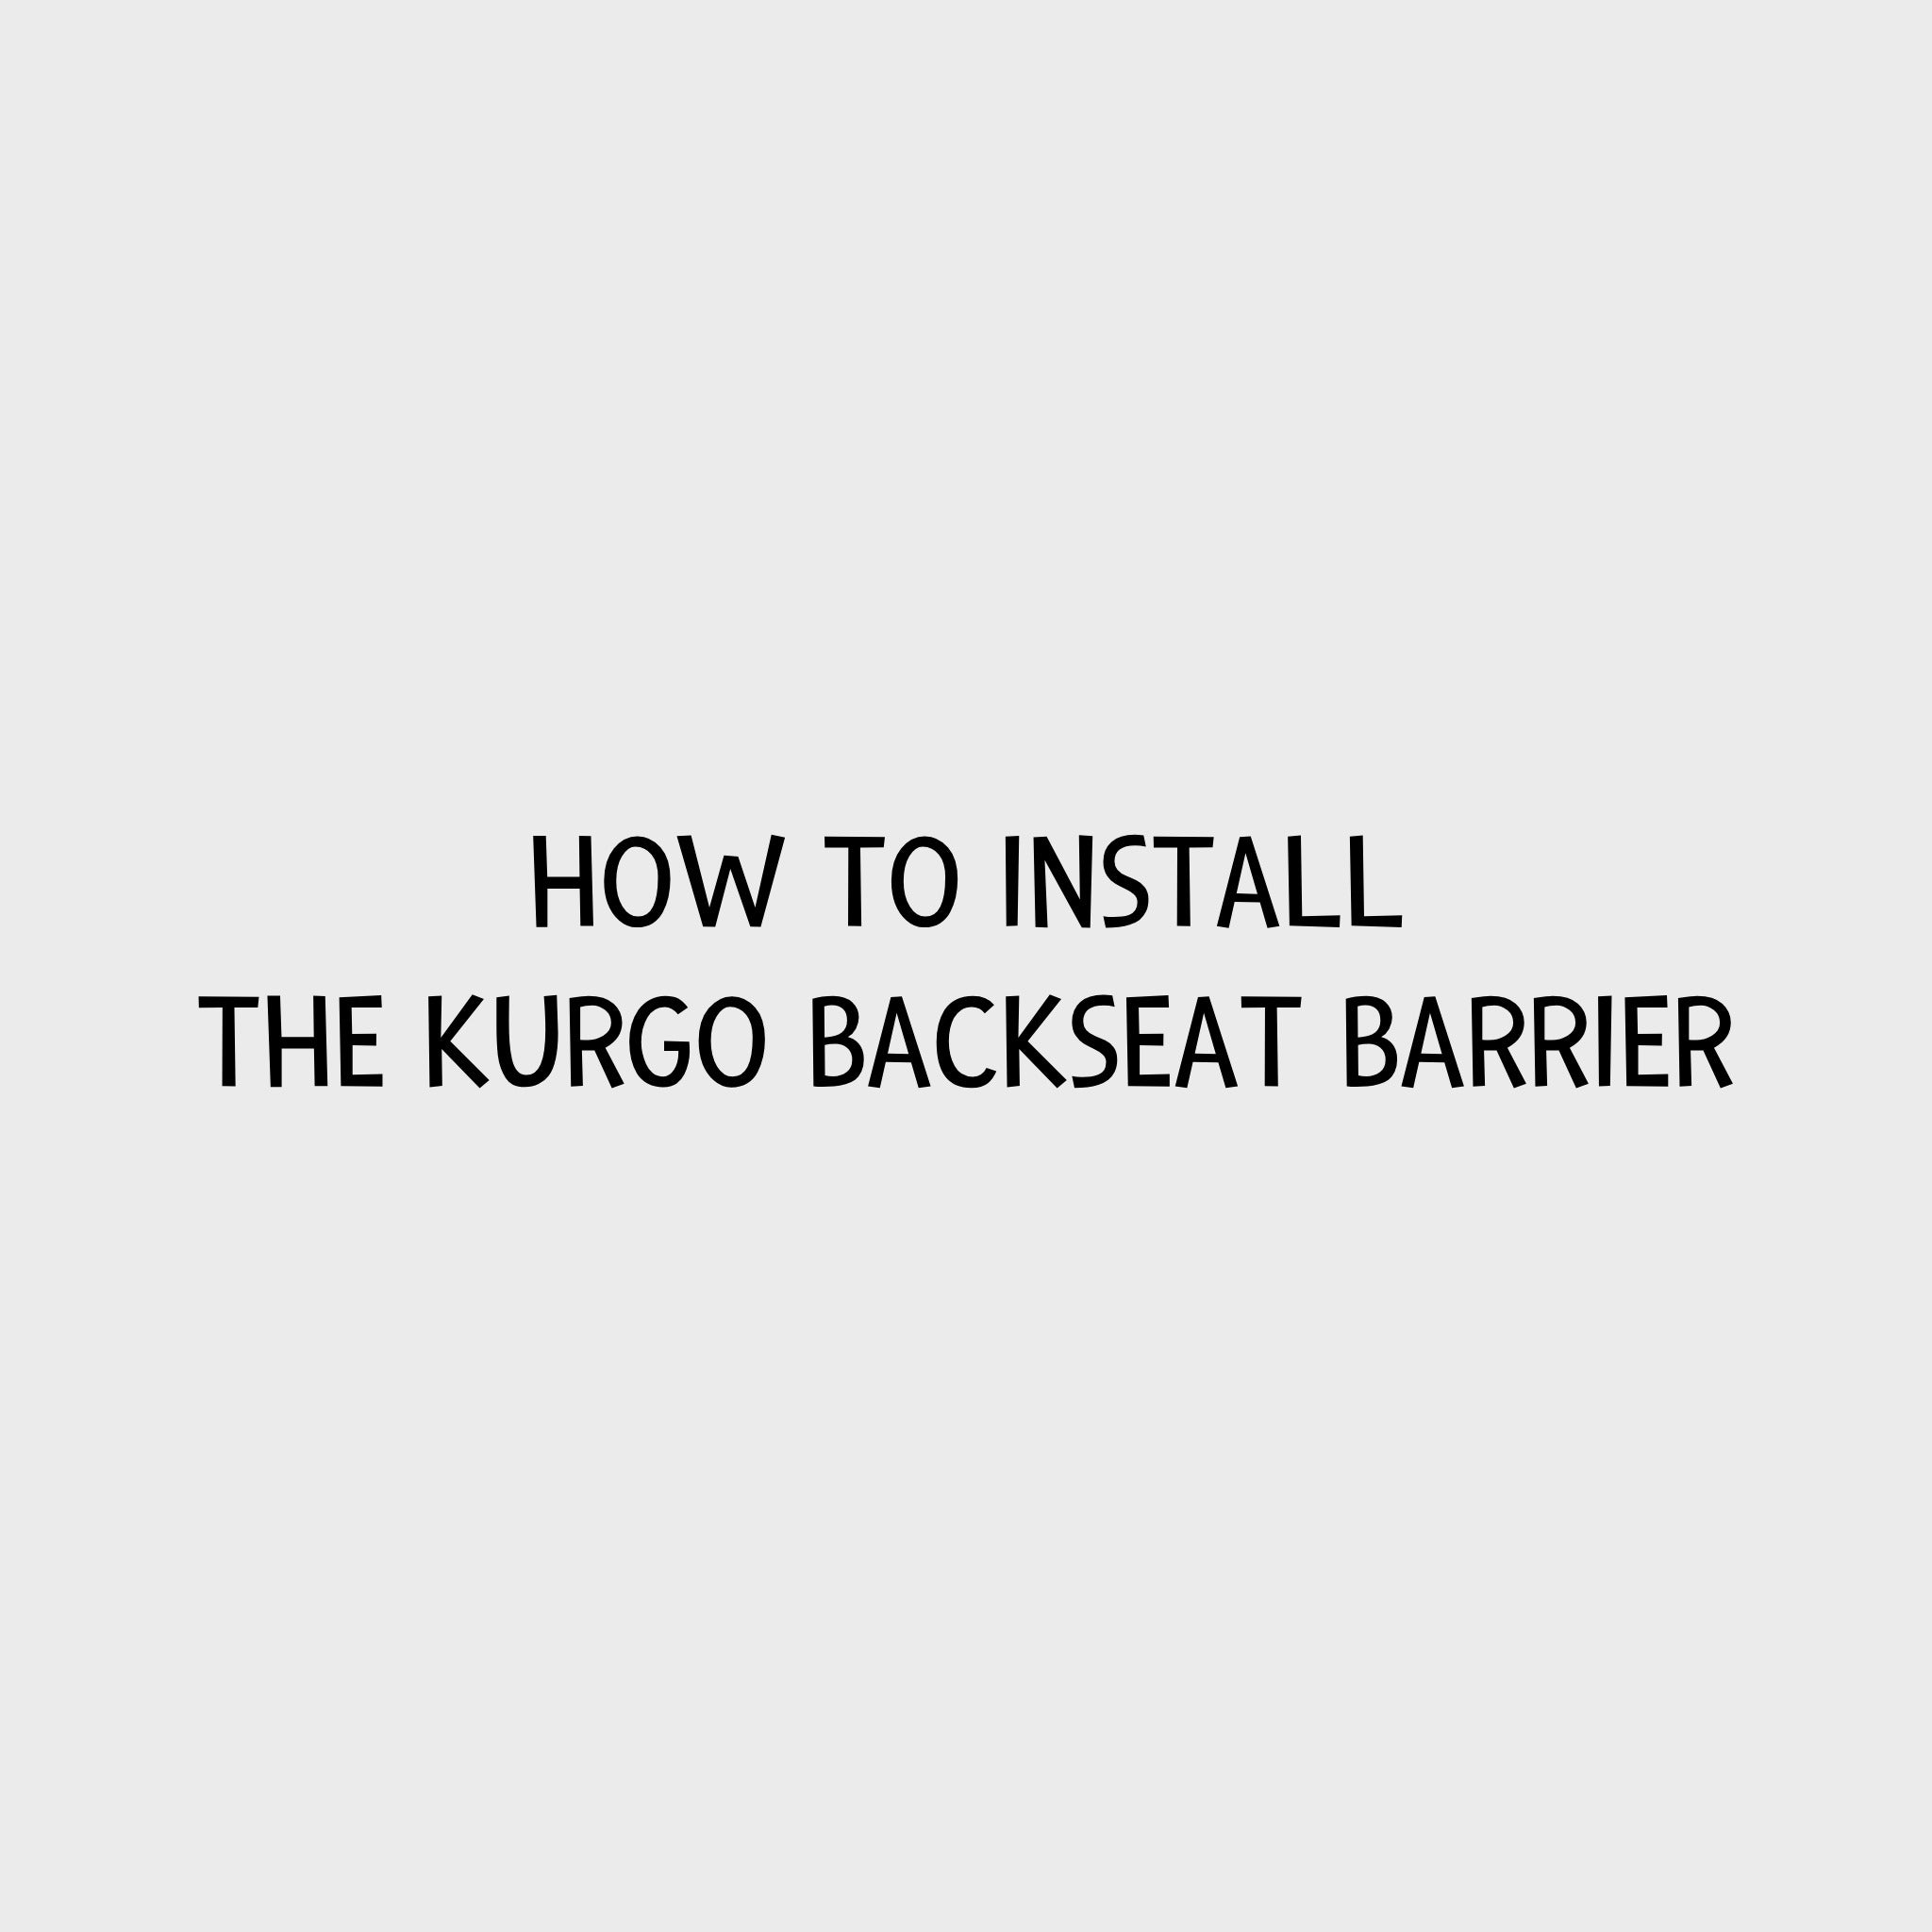 Video - How to install the Kurgo Backseat Barrier